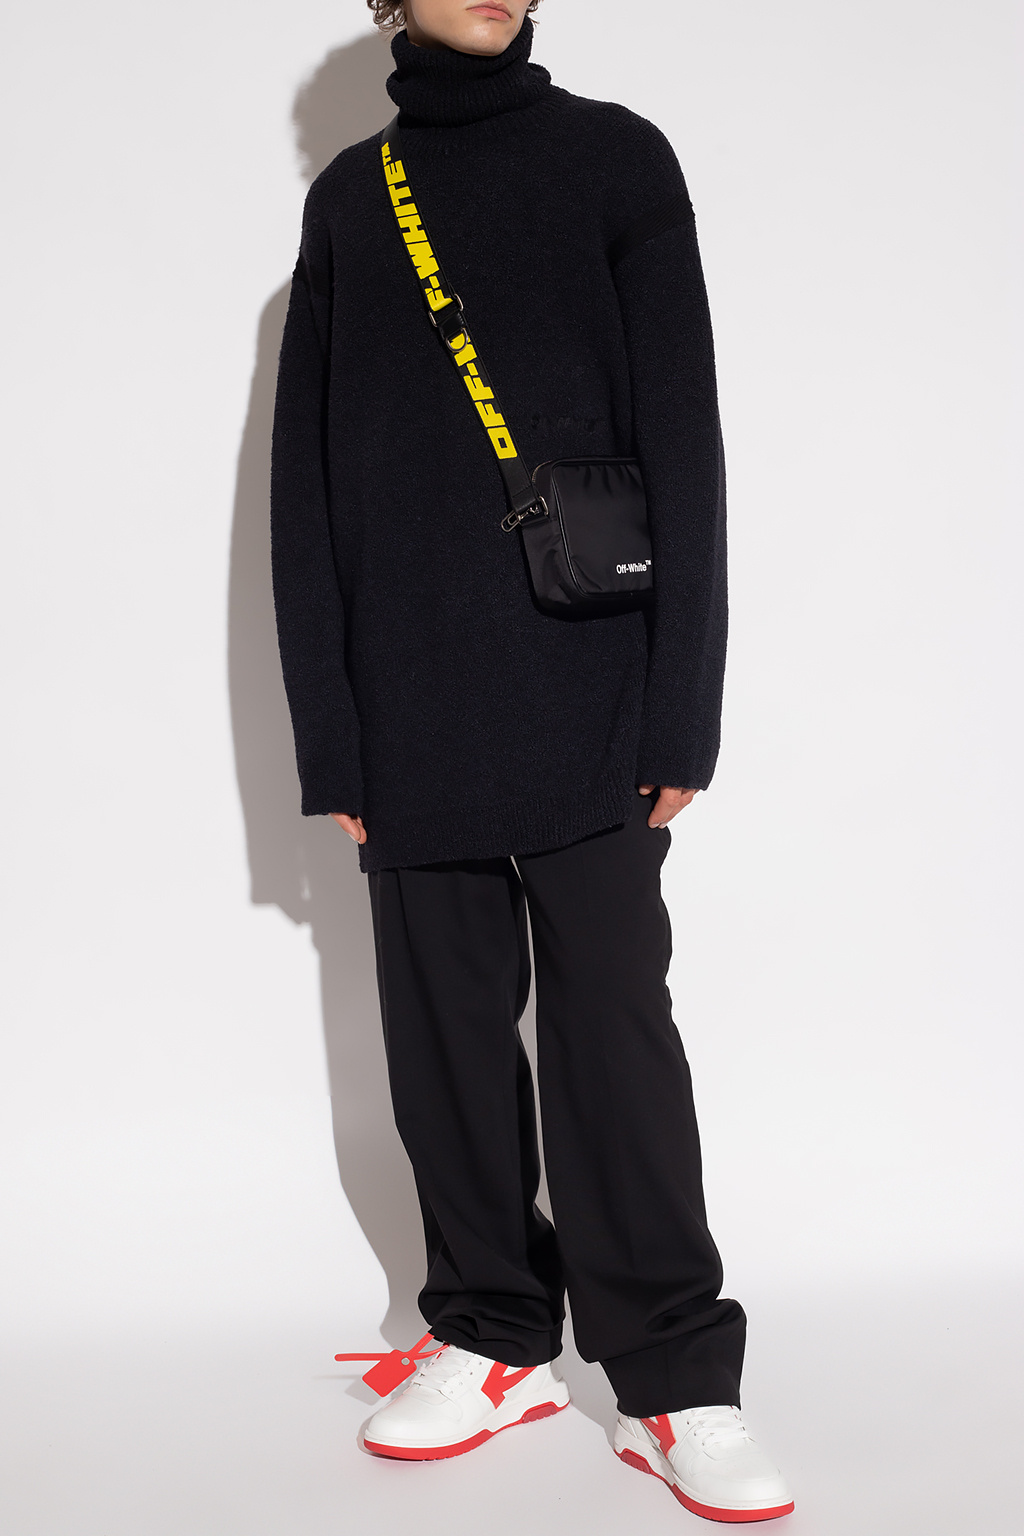 Off-White Turtleneck Rules sweater